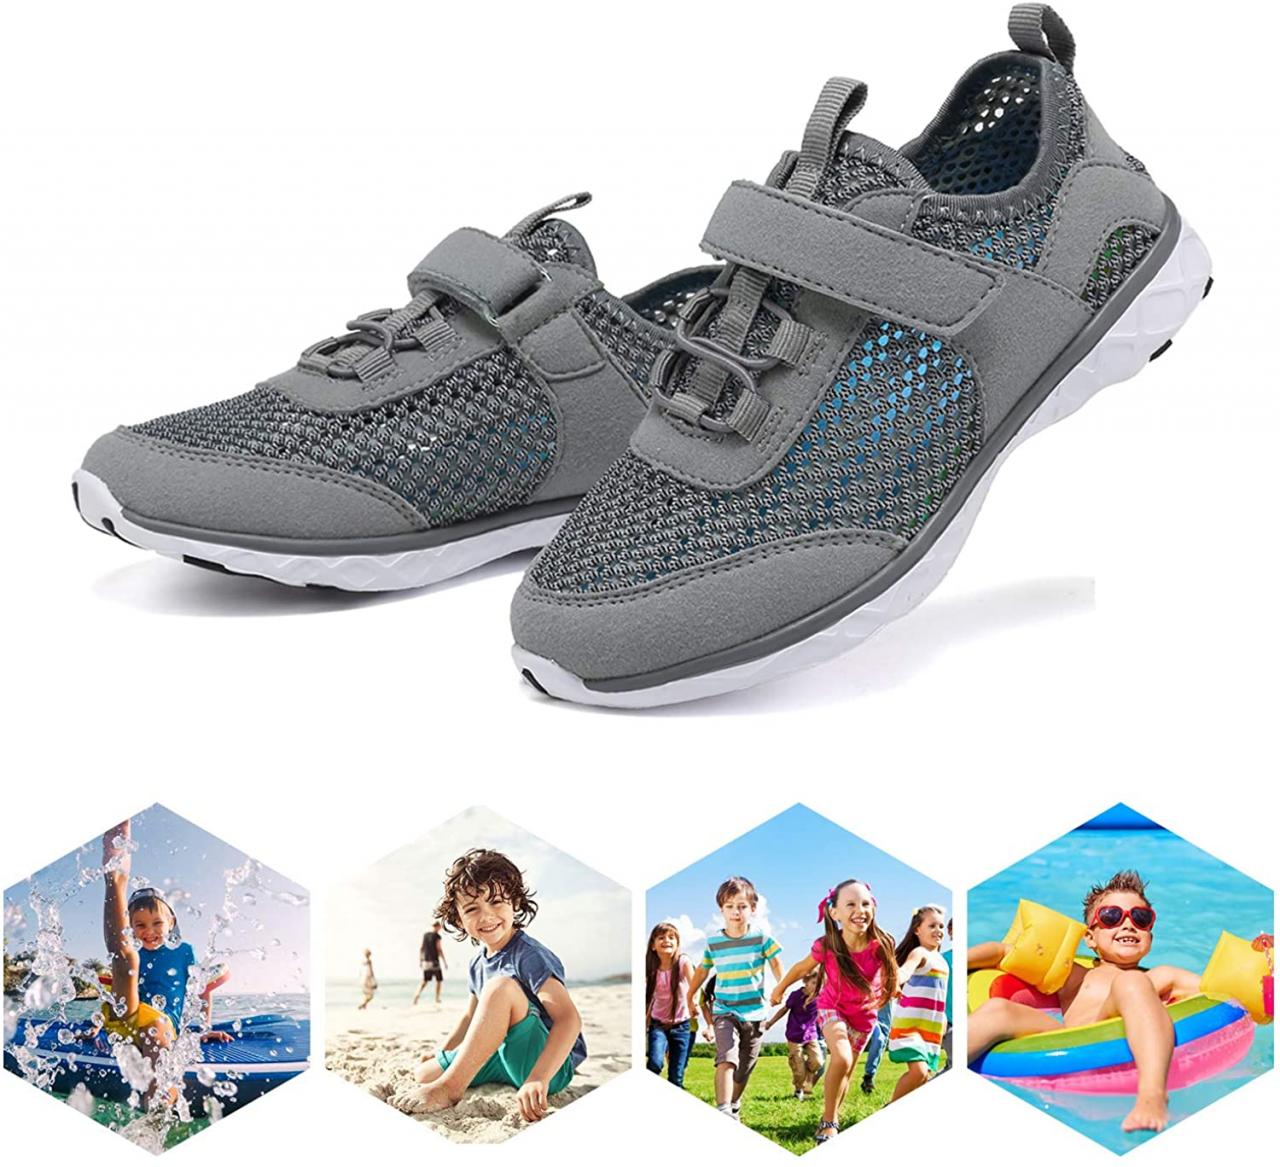 Cior Quick Dry Water Sports Aqua Shoes Top Sellers, UP TO 51% OFF